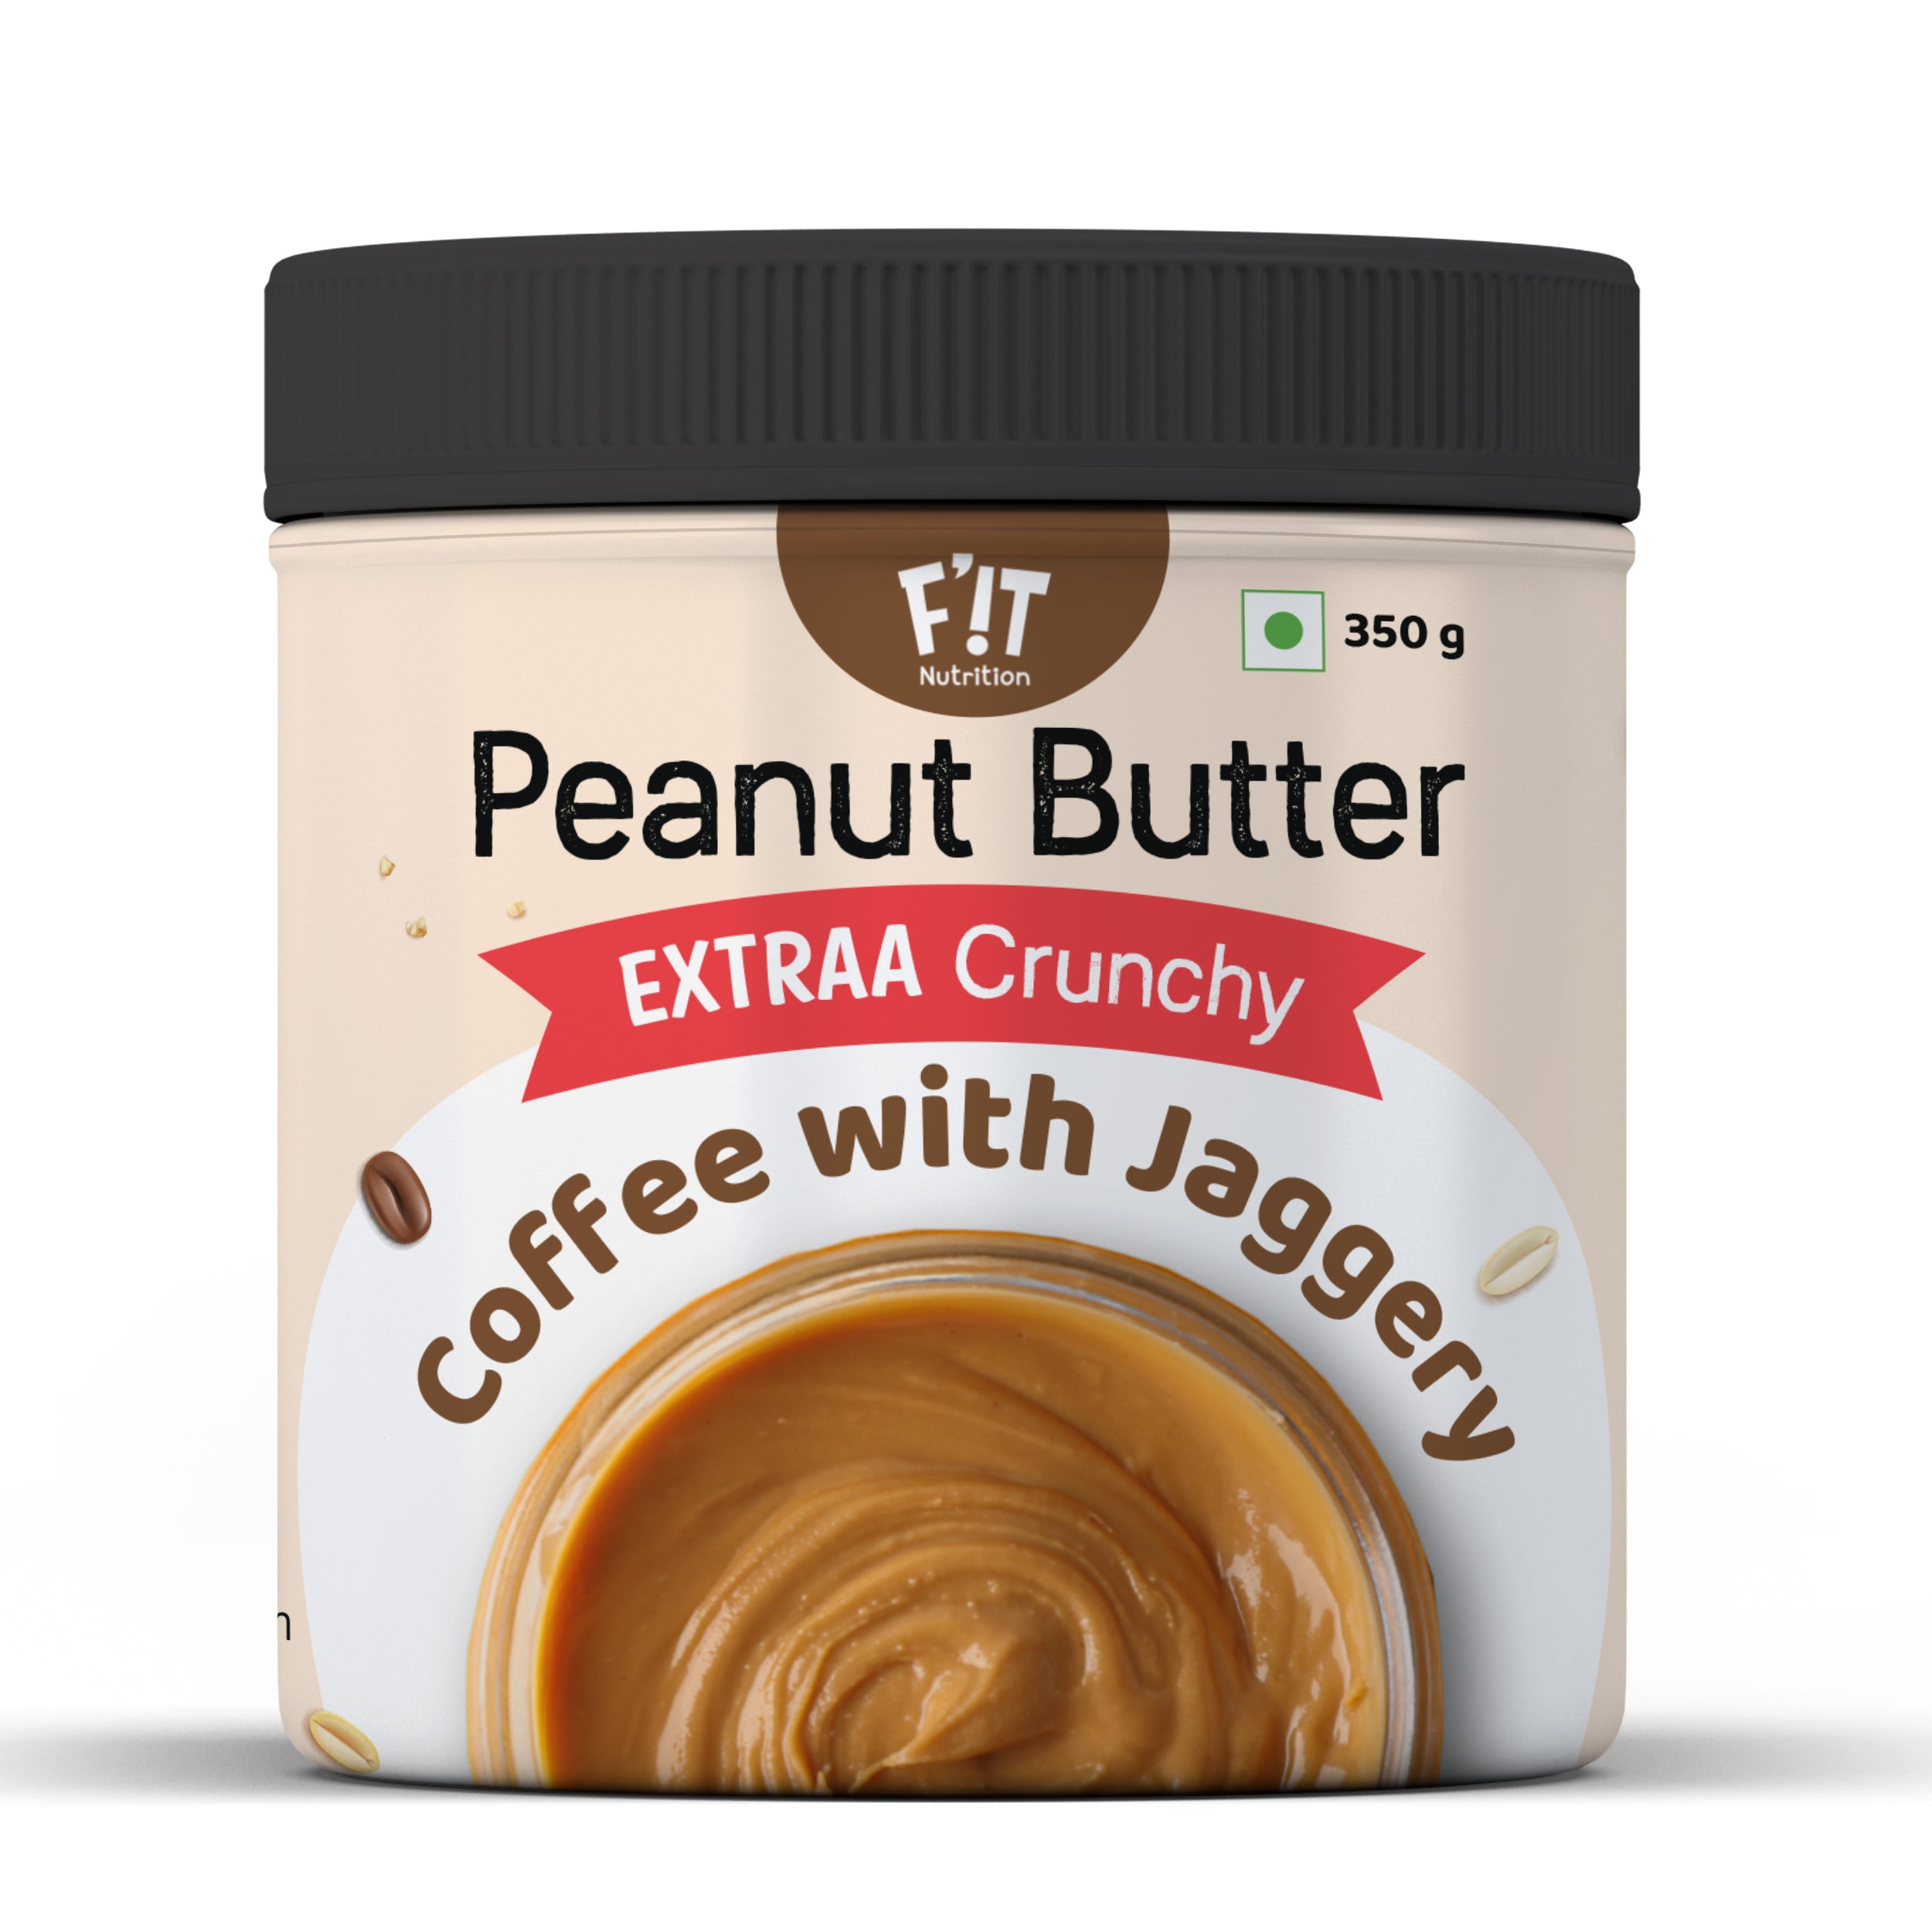 FiT Nutrition Coffee Peanut Butter | With Jaggery | EXTRAA Crunchy | High Protein | Gluten Free | 350g